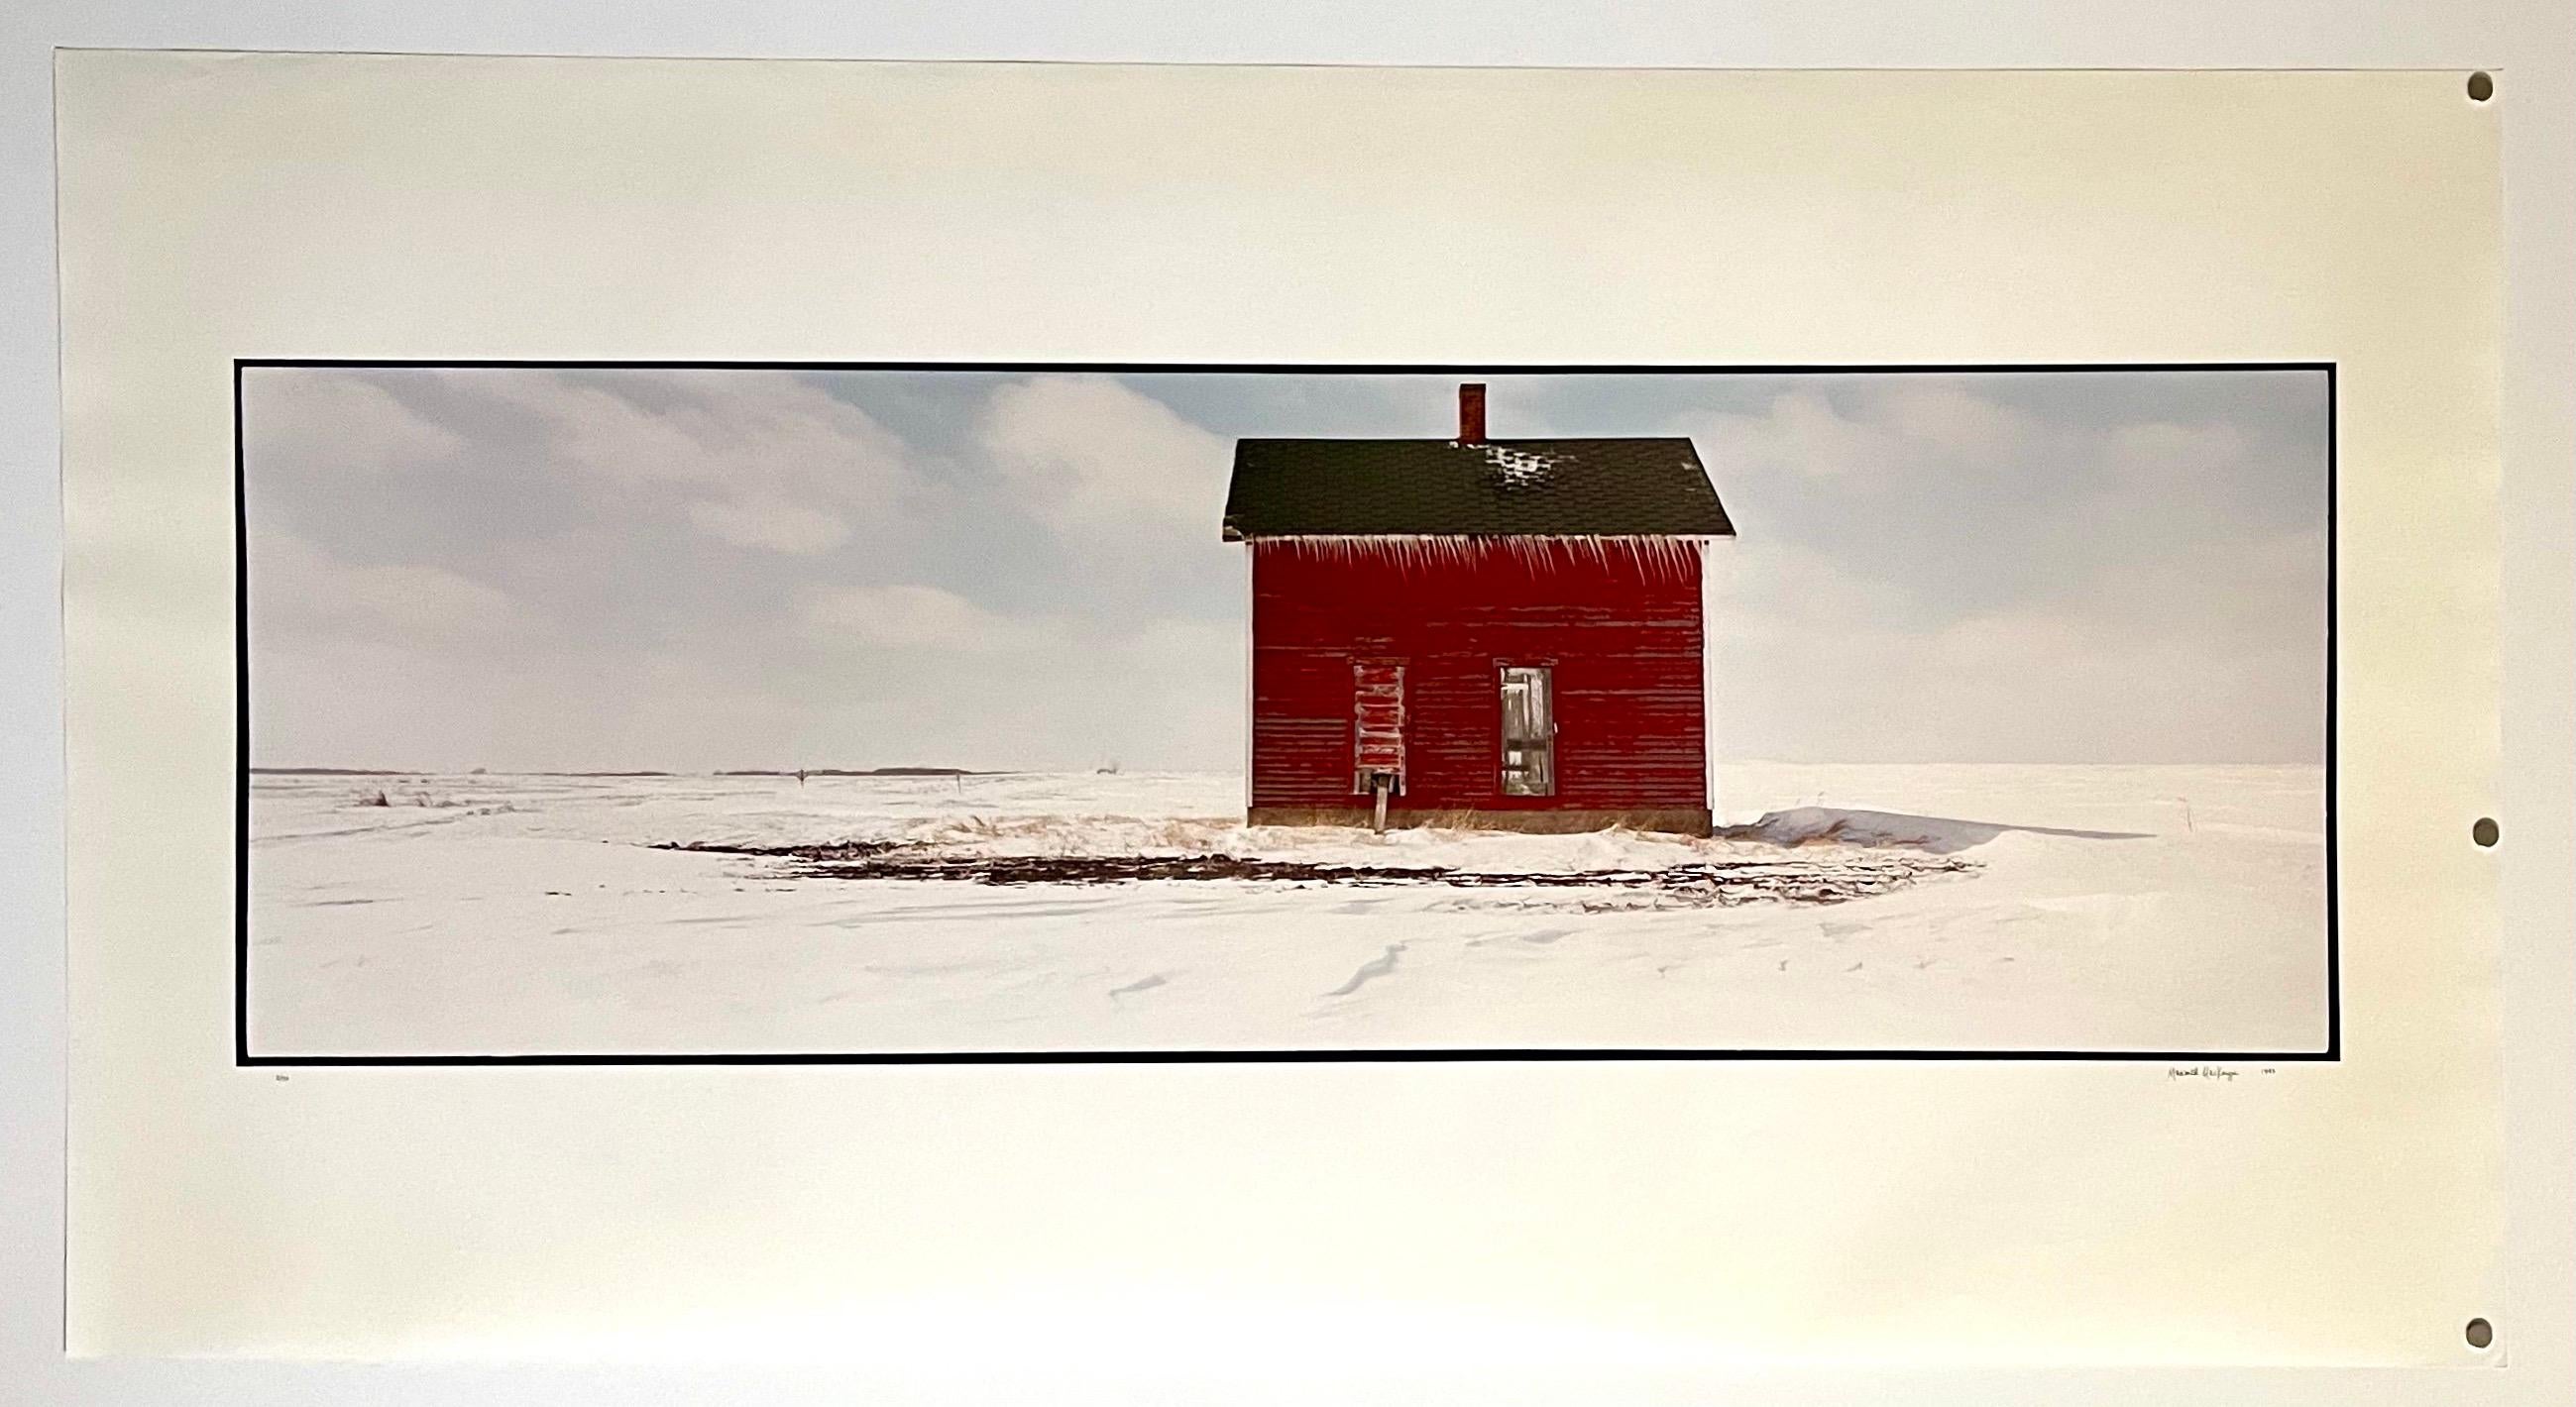 Maplewood Township Homestead, Winter, 1993
Fabulous American landscape photography of a rural landscape scene. 
from small hand signed edition of 20
Large Format Chromogenic print on Kodak Professional Paper
The sheets are approximately 30 X 56